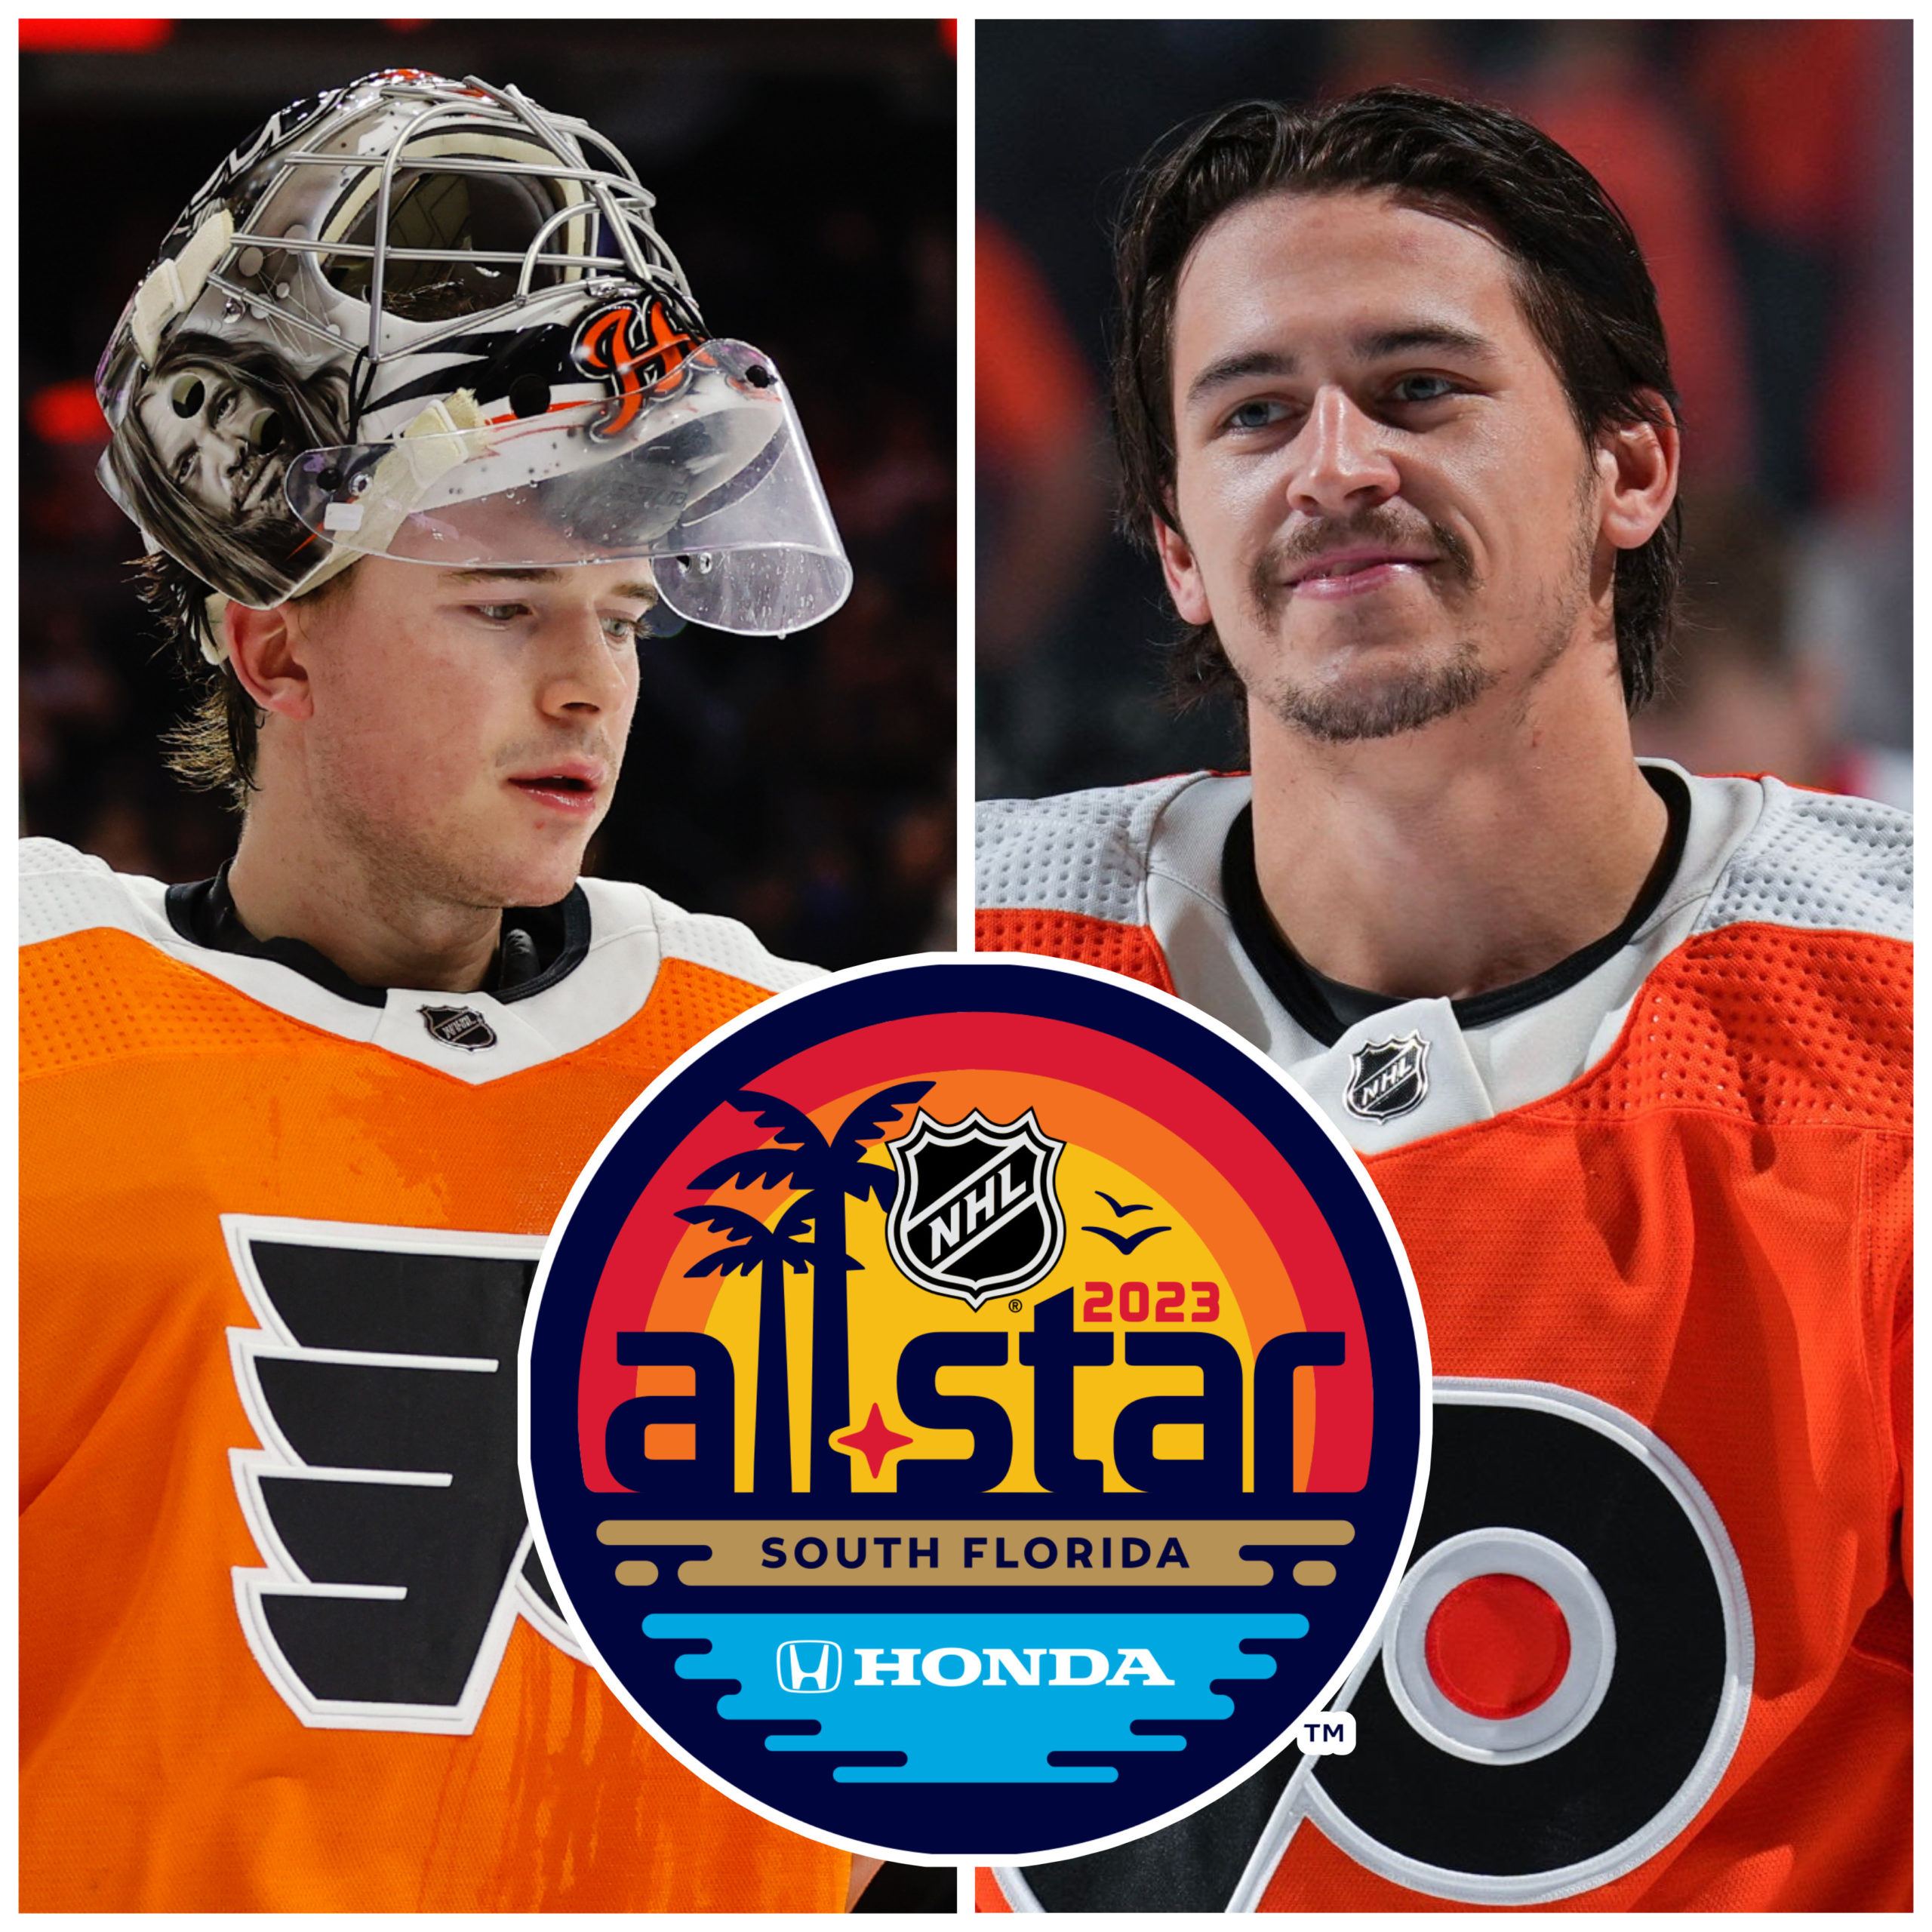 Konecny joins Hart as an untouchable on the Flyers' roster